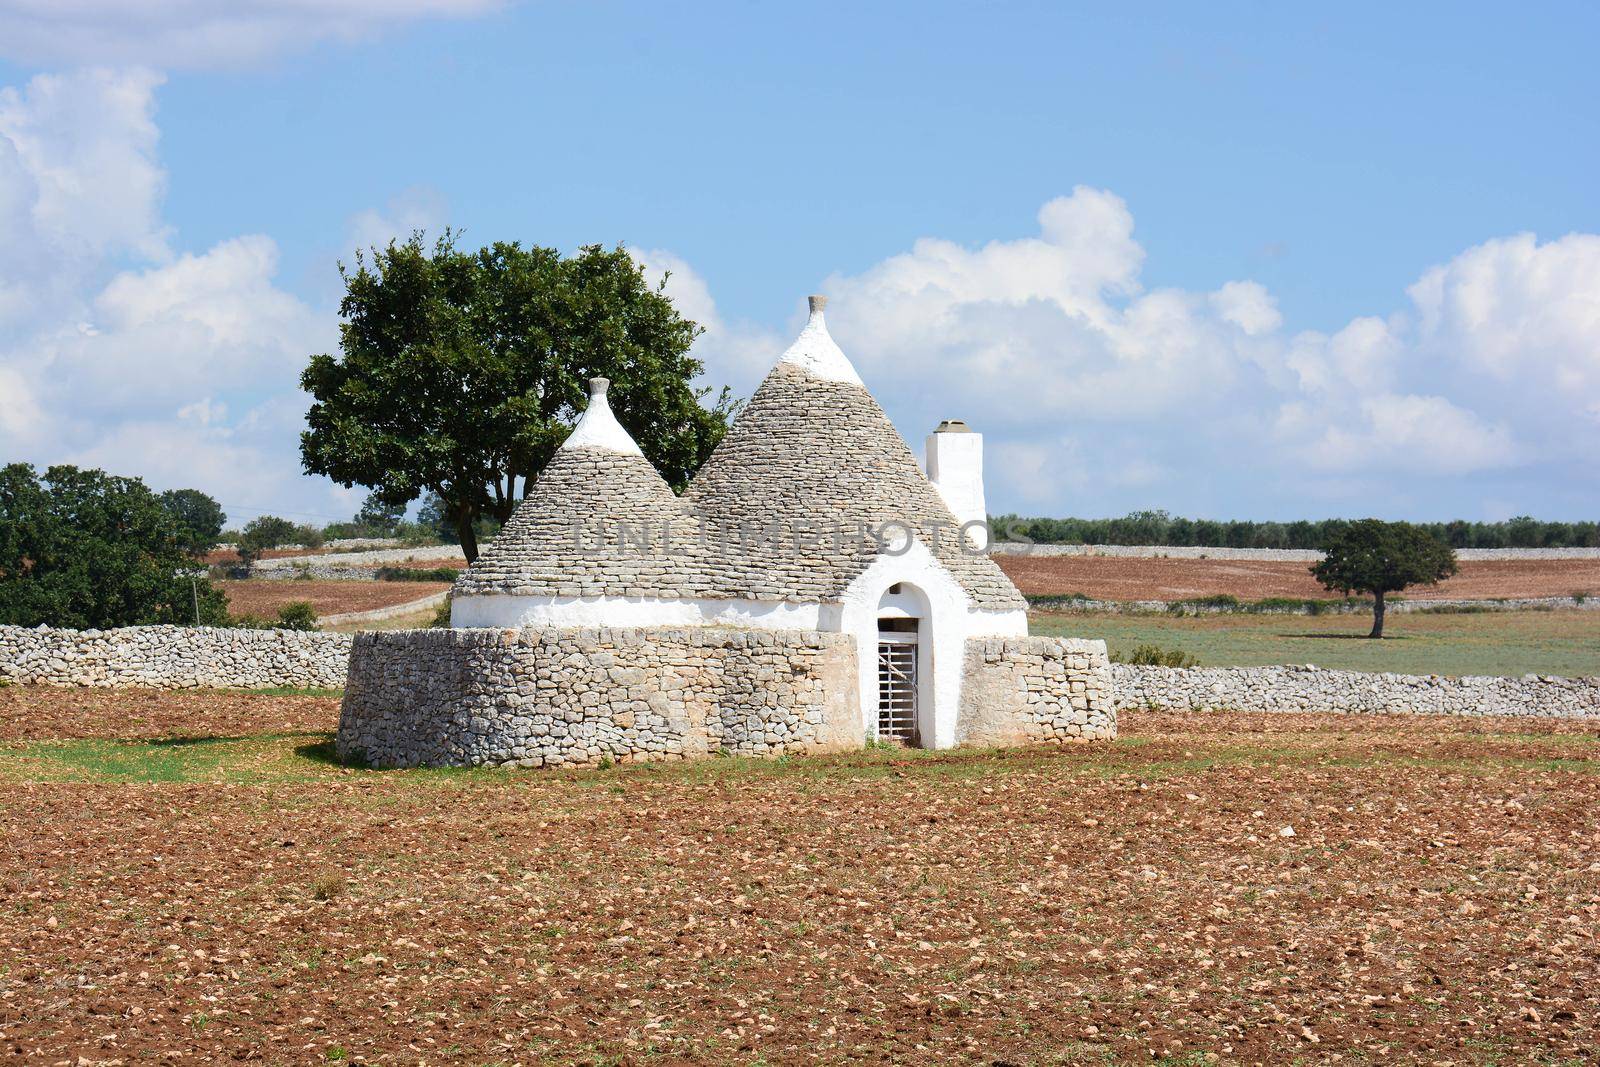 ancient peasant dwelling of south-eastern Italy